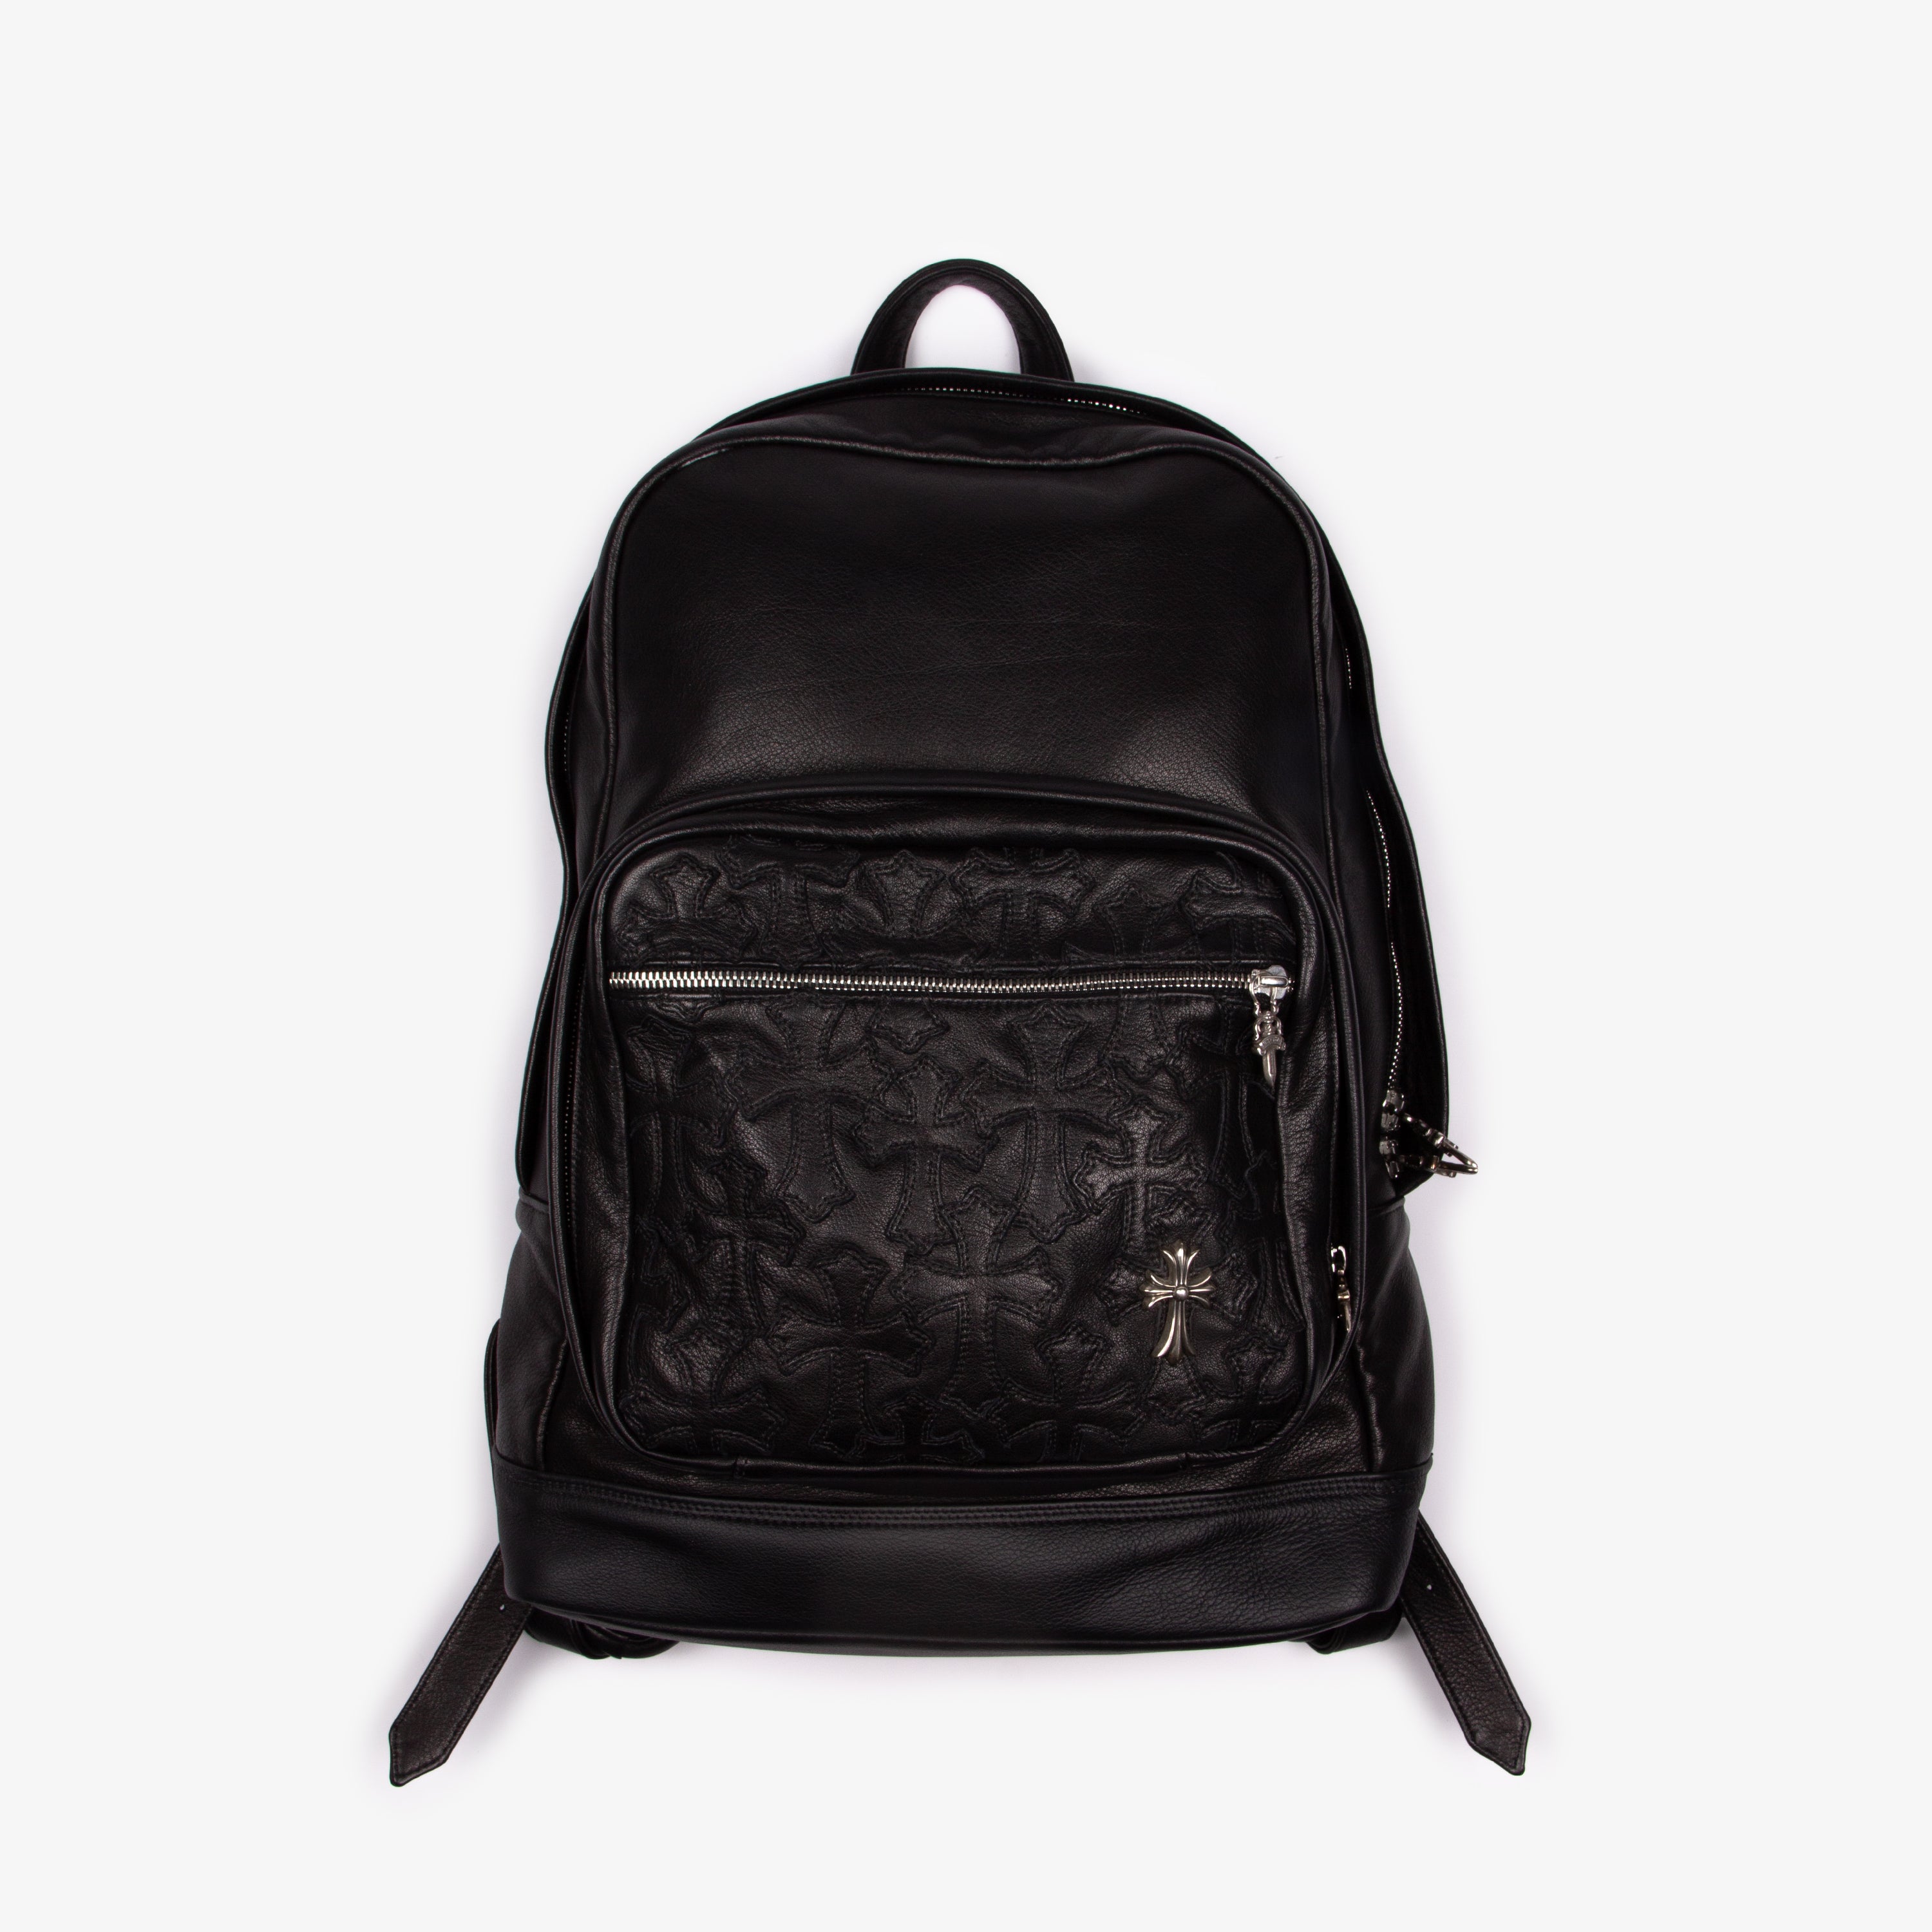 BLACK LEATHER CEMETERY 7TH GRADE BACKPACK